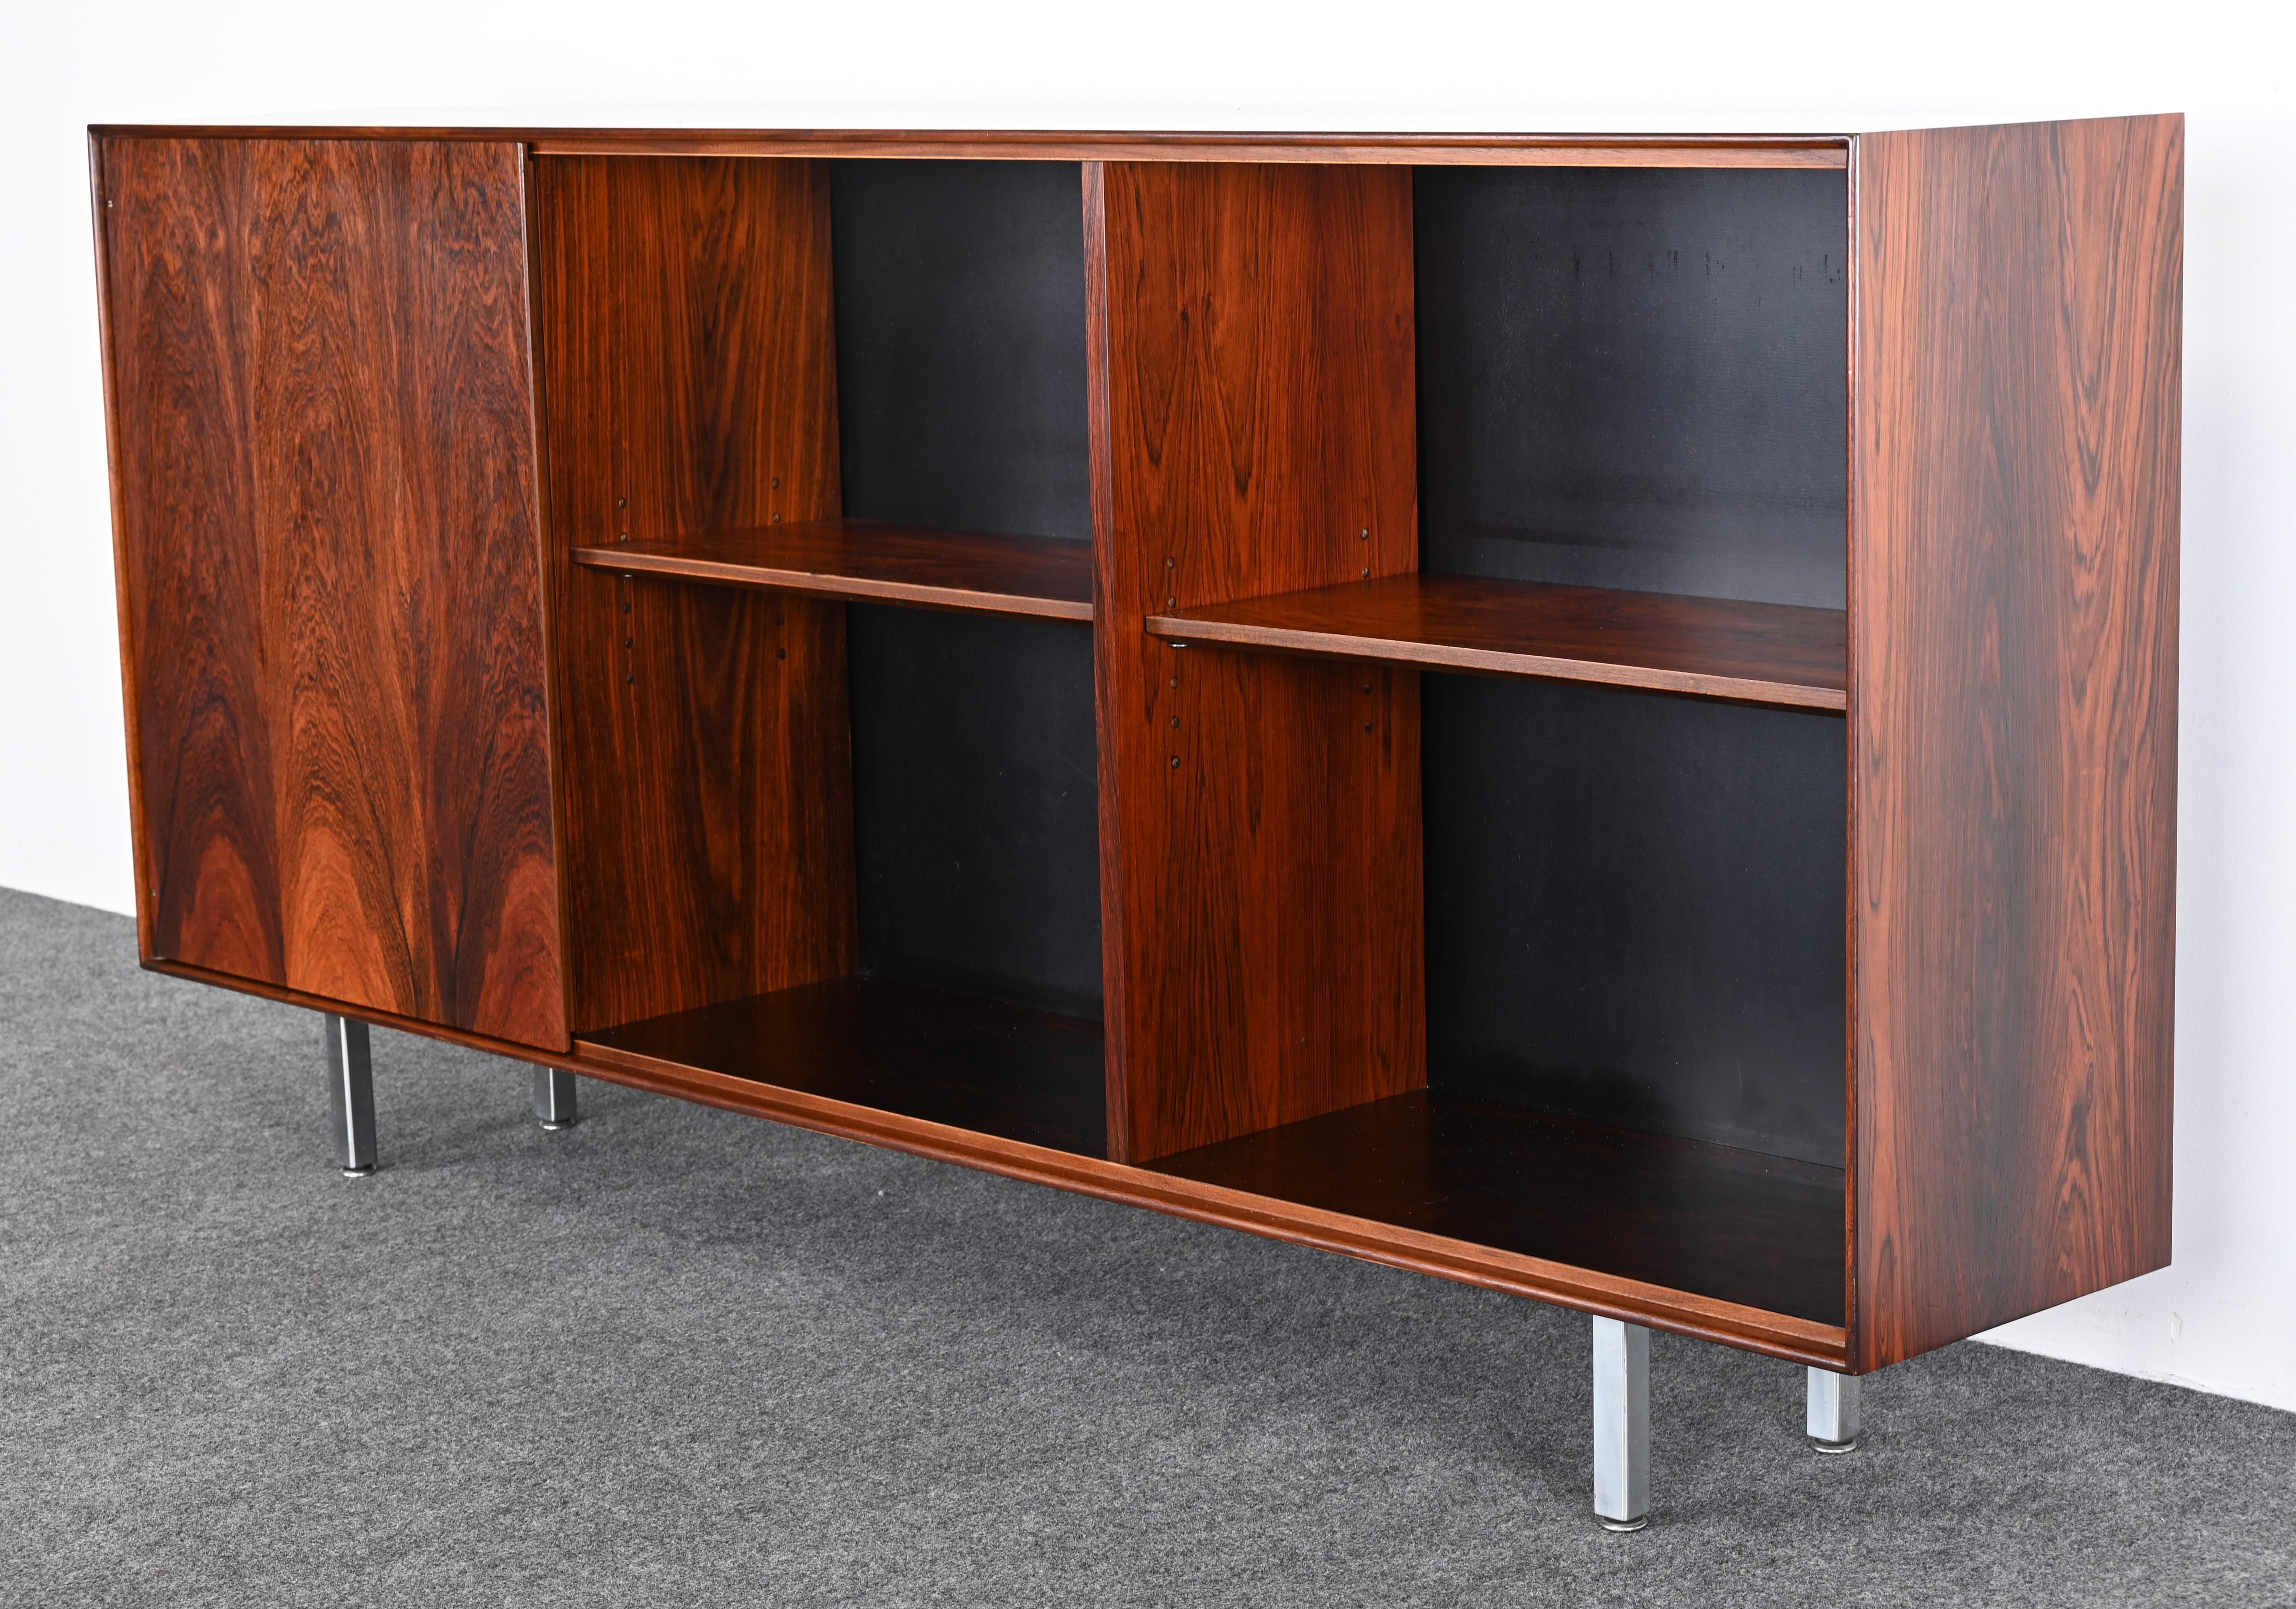 Rosewood Thin Edge Bookshelf by George Nelson for Herman Miller, 1950s For Sale 7